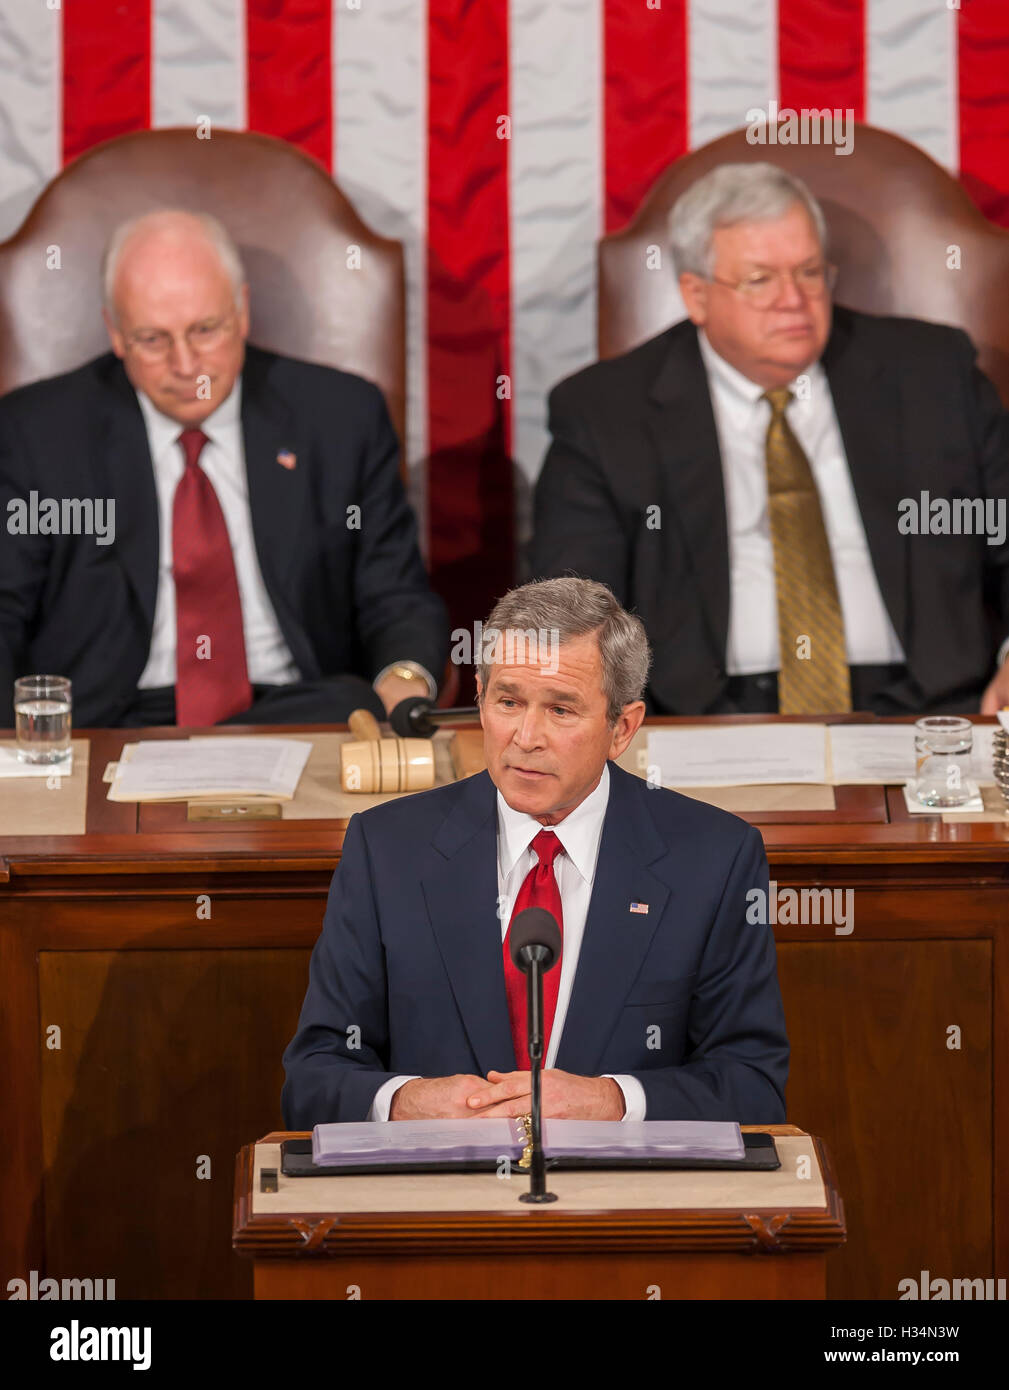 WASHINGTON, DC, USA - President George W. Bush delivering his State of the Union speech before joint session of Congress on February 2, 2005. Stock Photo